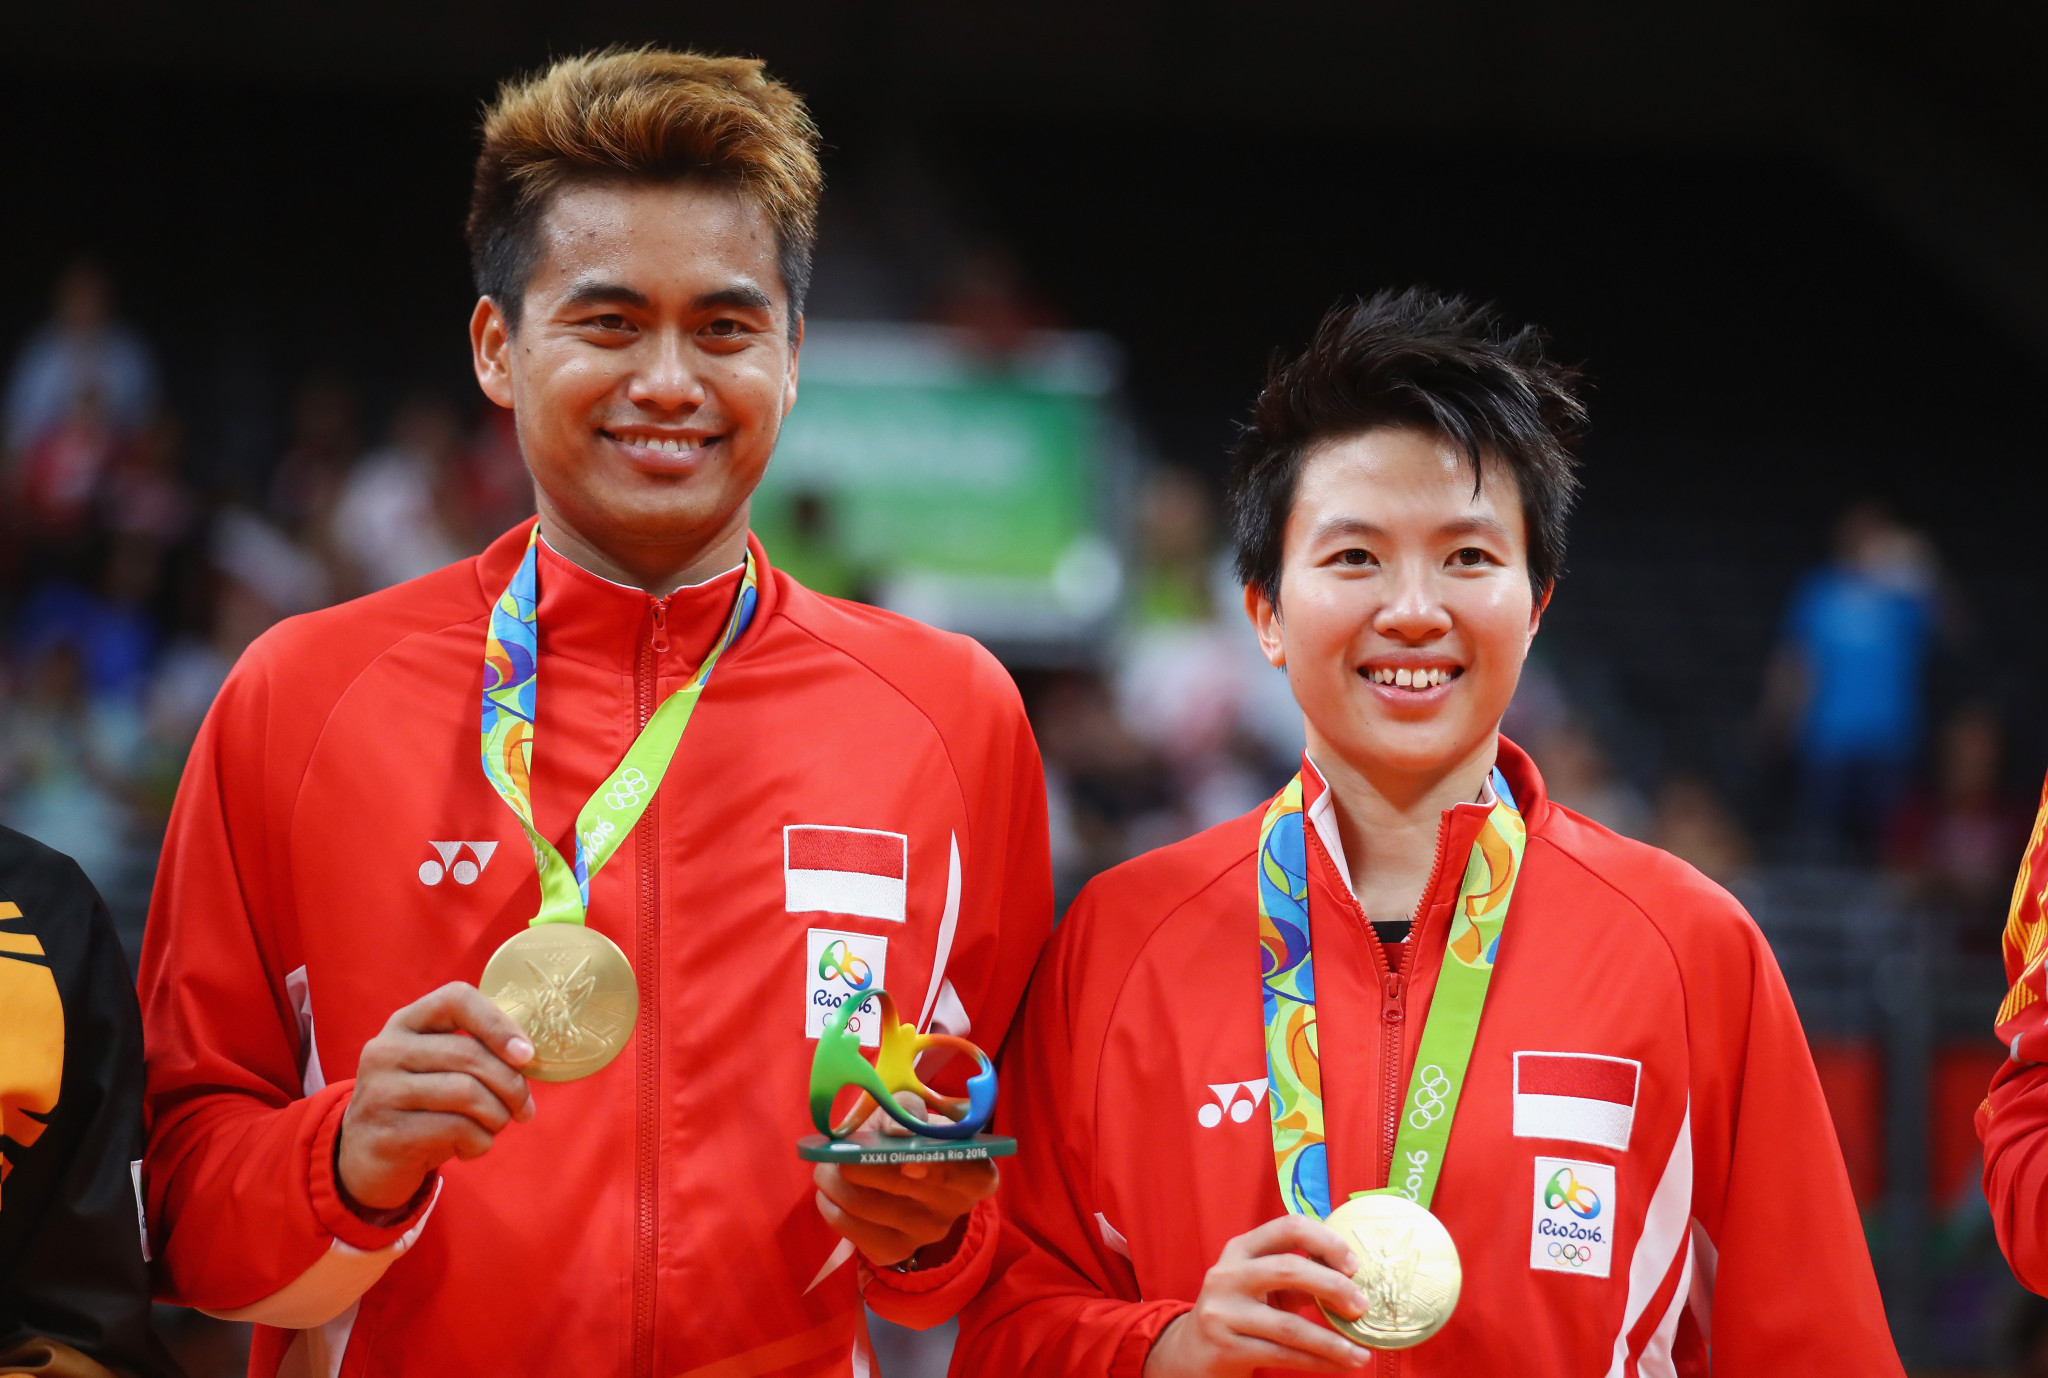 Indonesian badminton players Tontowi Ahmad and Liliyana Natsir celebrate their Olympic gold medals at Rio 2016 ©Getty Images